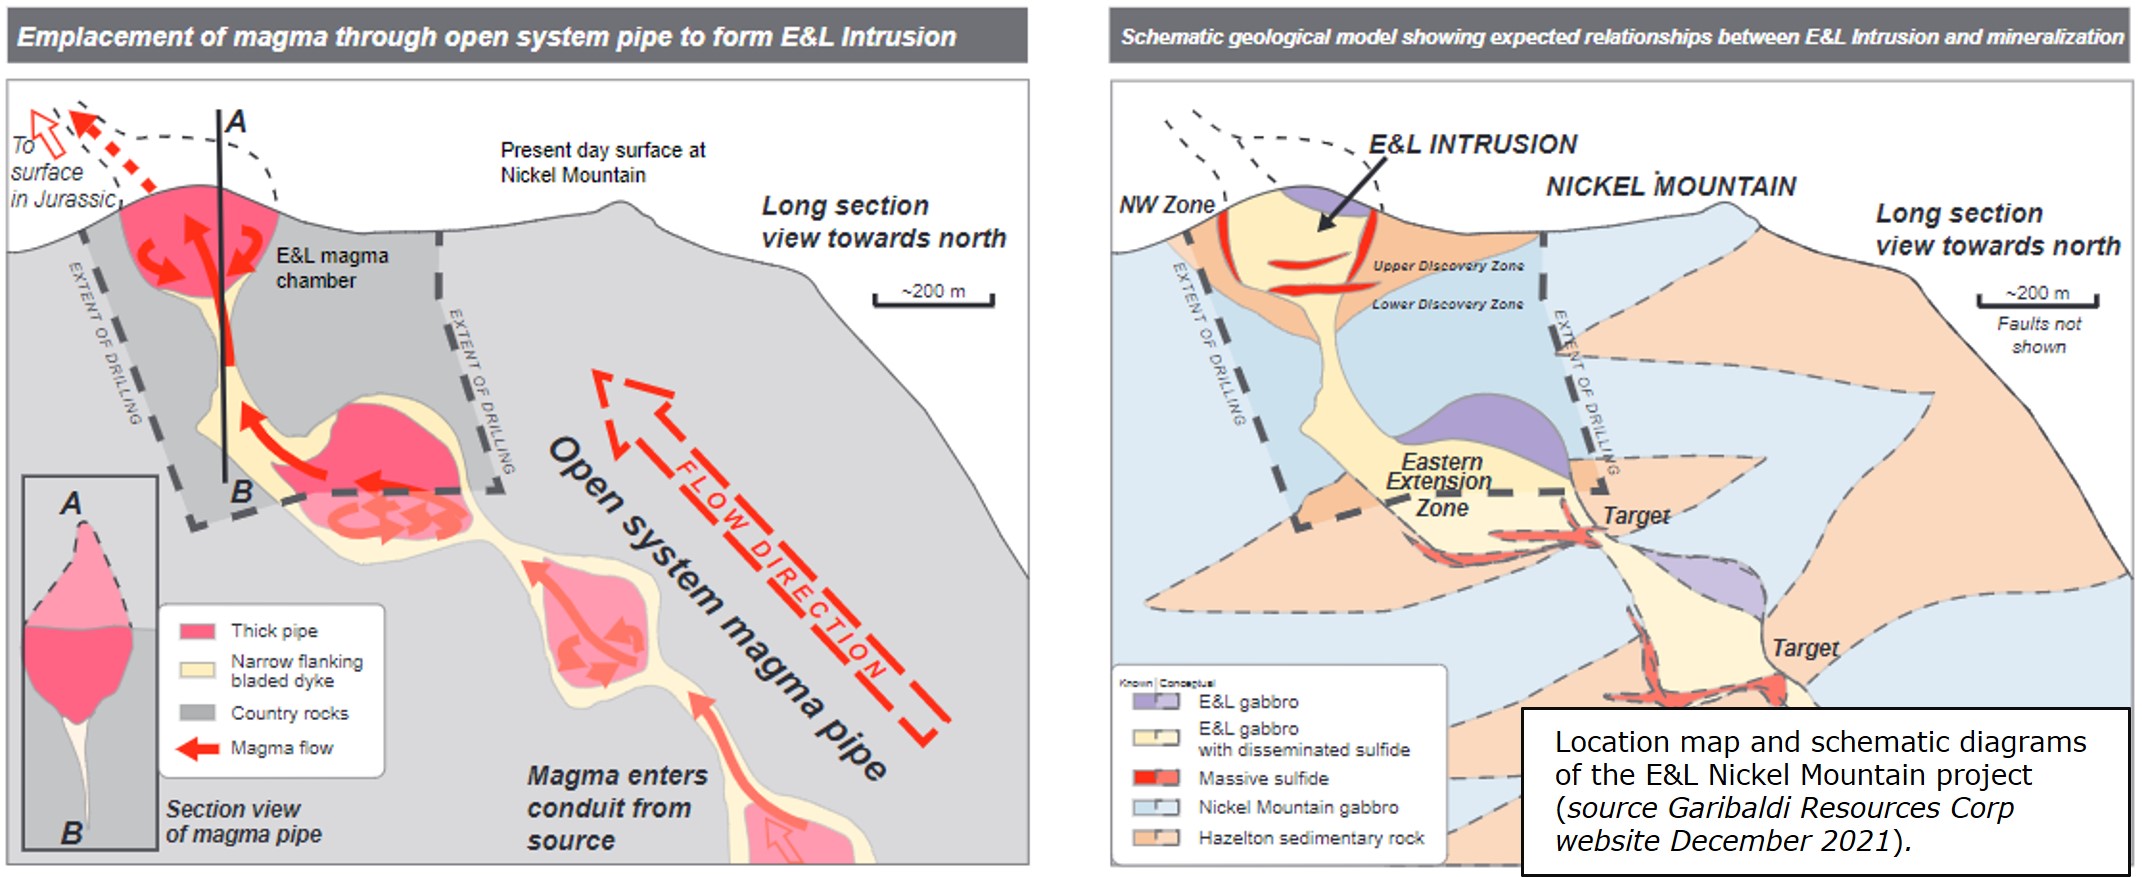 Schematic diagrams of the E&L Nickel Mountain project. Left: depiction of magma emplacement that forms E&L intrusion; Right: depiction of expected relationship between E&L Intrusion and mineralization. (source Garibaldi Resources Corp website December 2021)